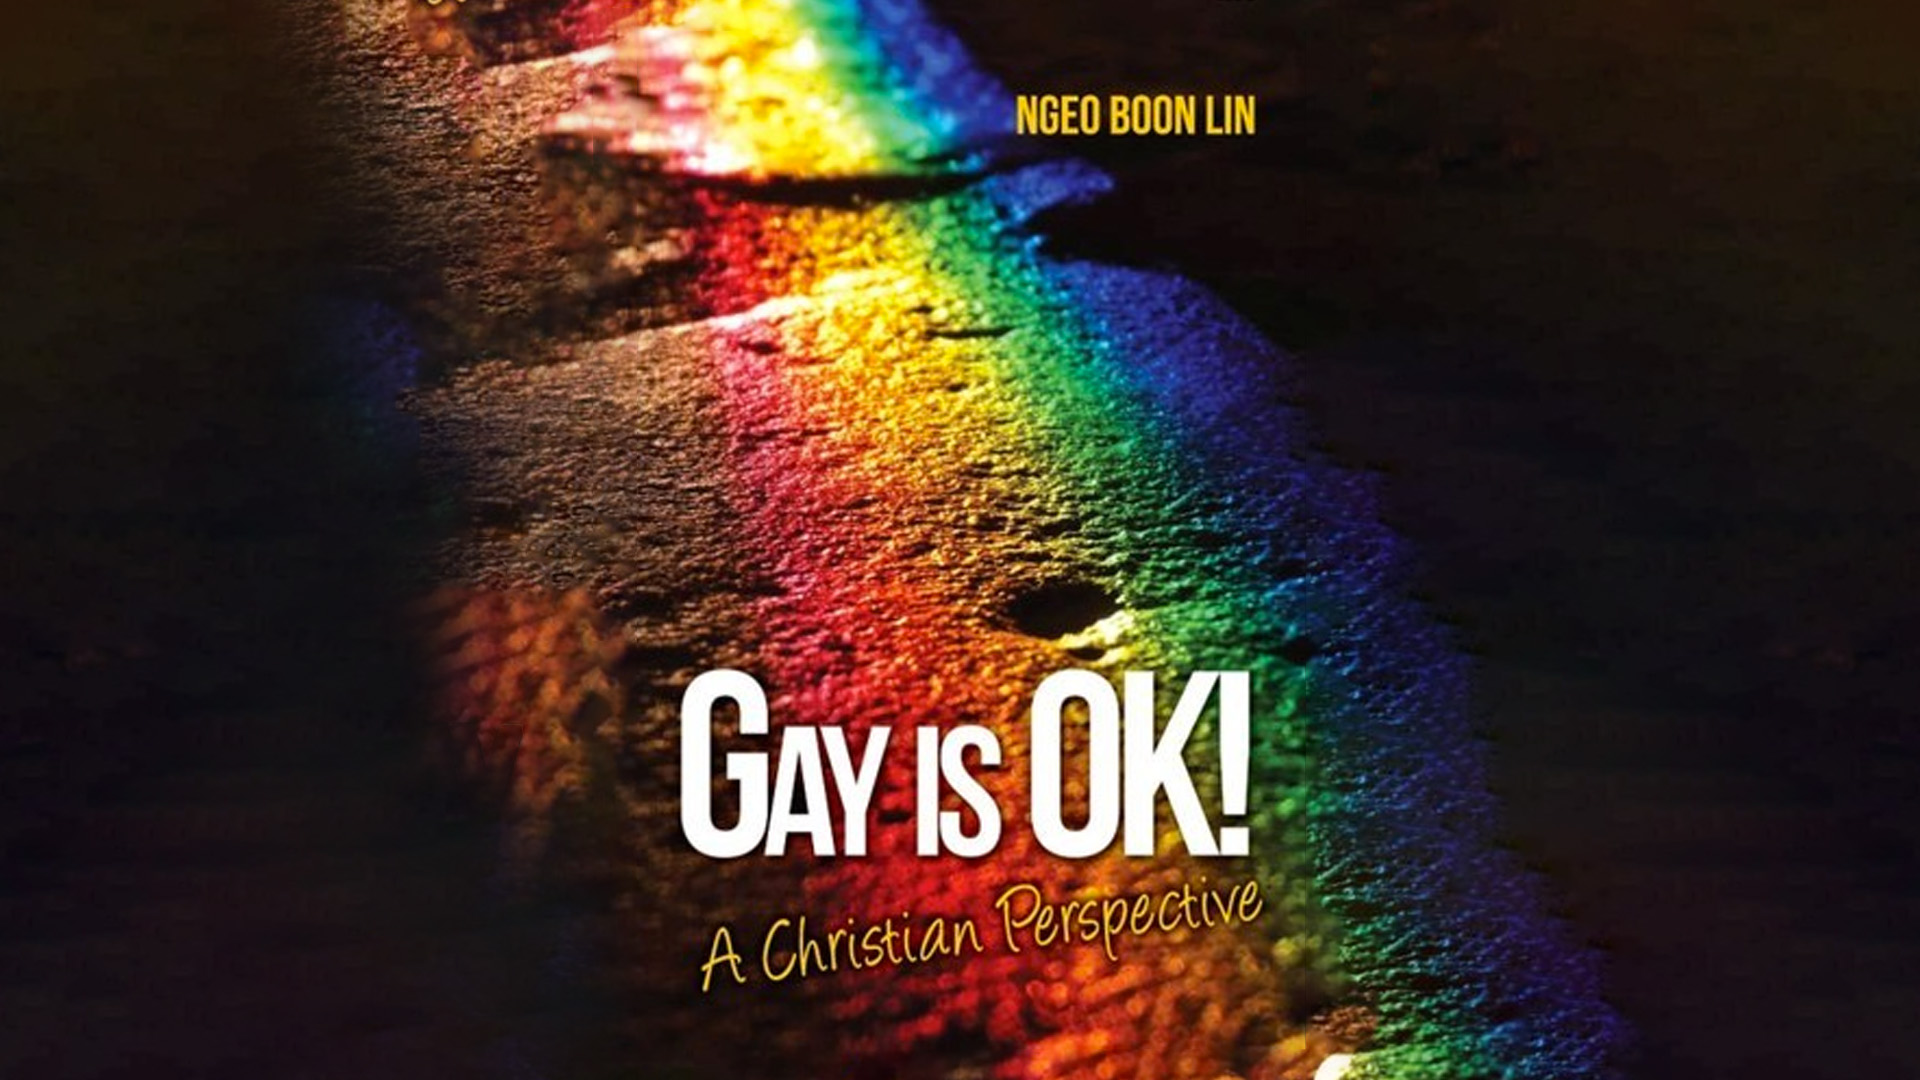 Court of Appeal reimposes ban on Gay is OK! book